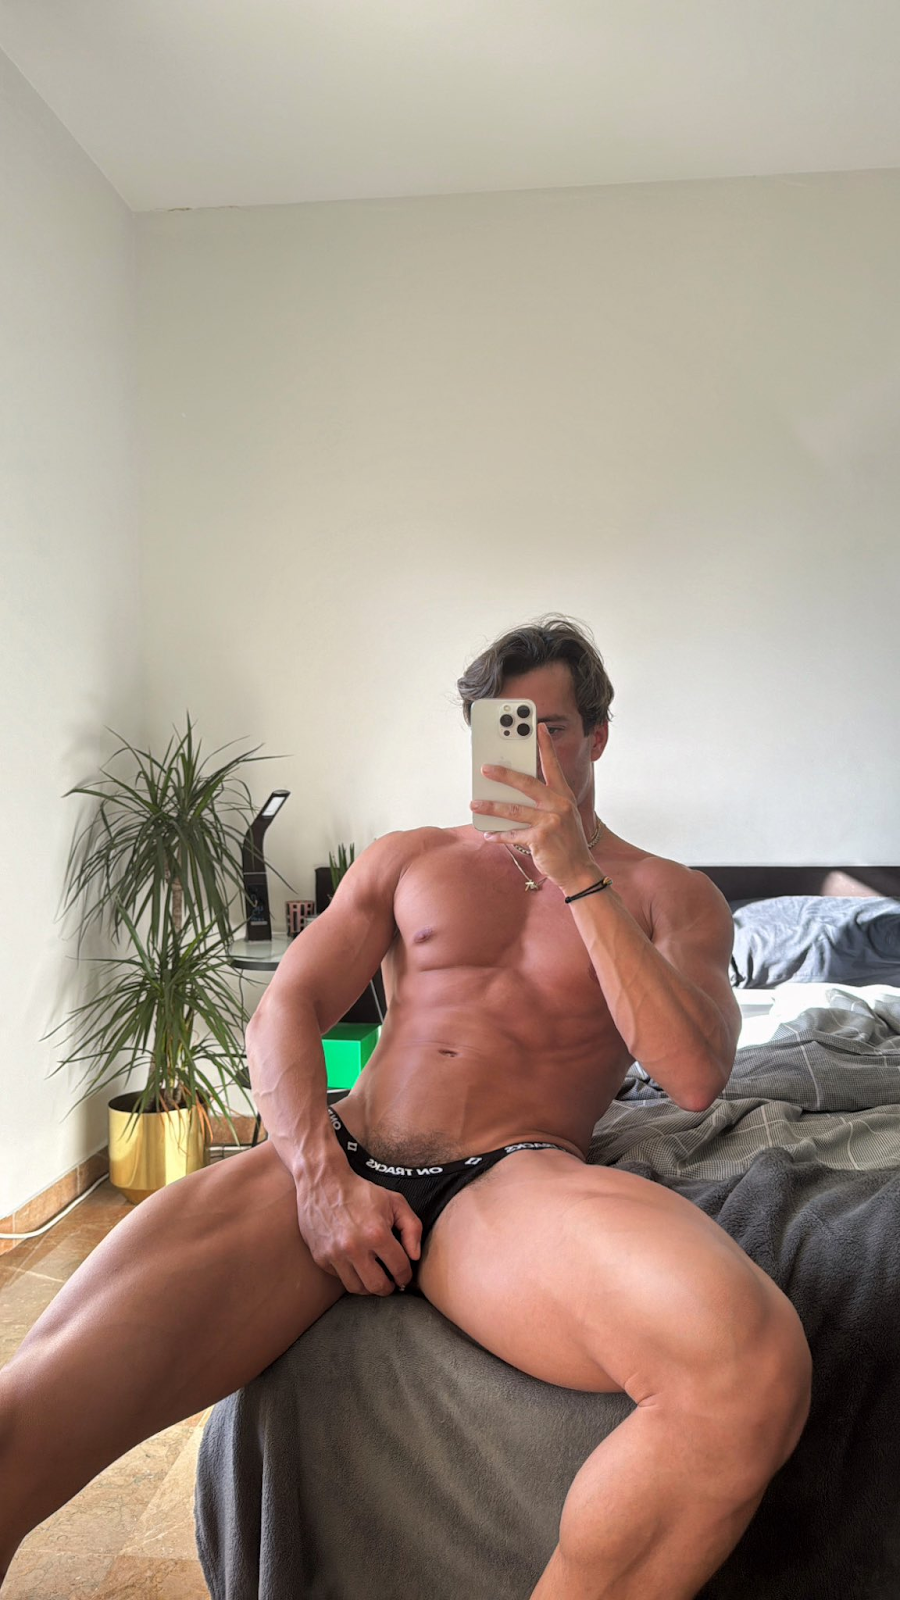 Eric Rmgr sitting on the bed in tiny little black udnerwear grabbibg his crotch taking a photo for social media and gay xxx onlyfans page